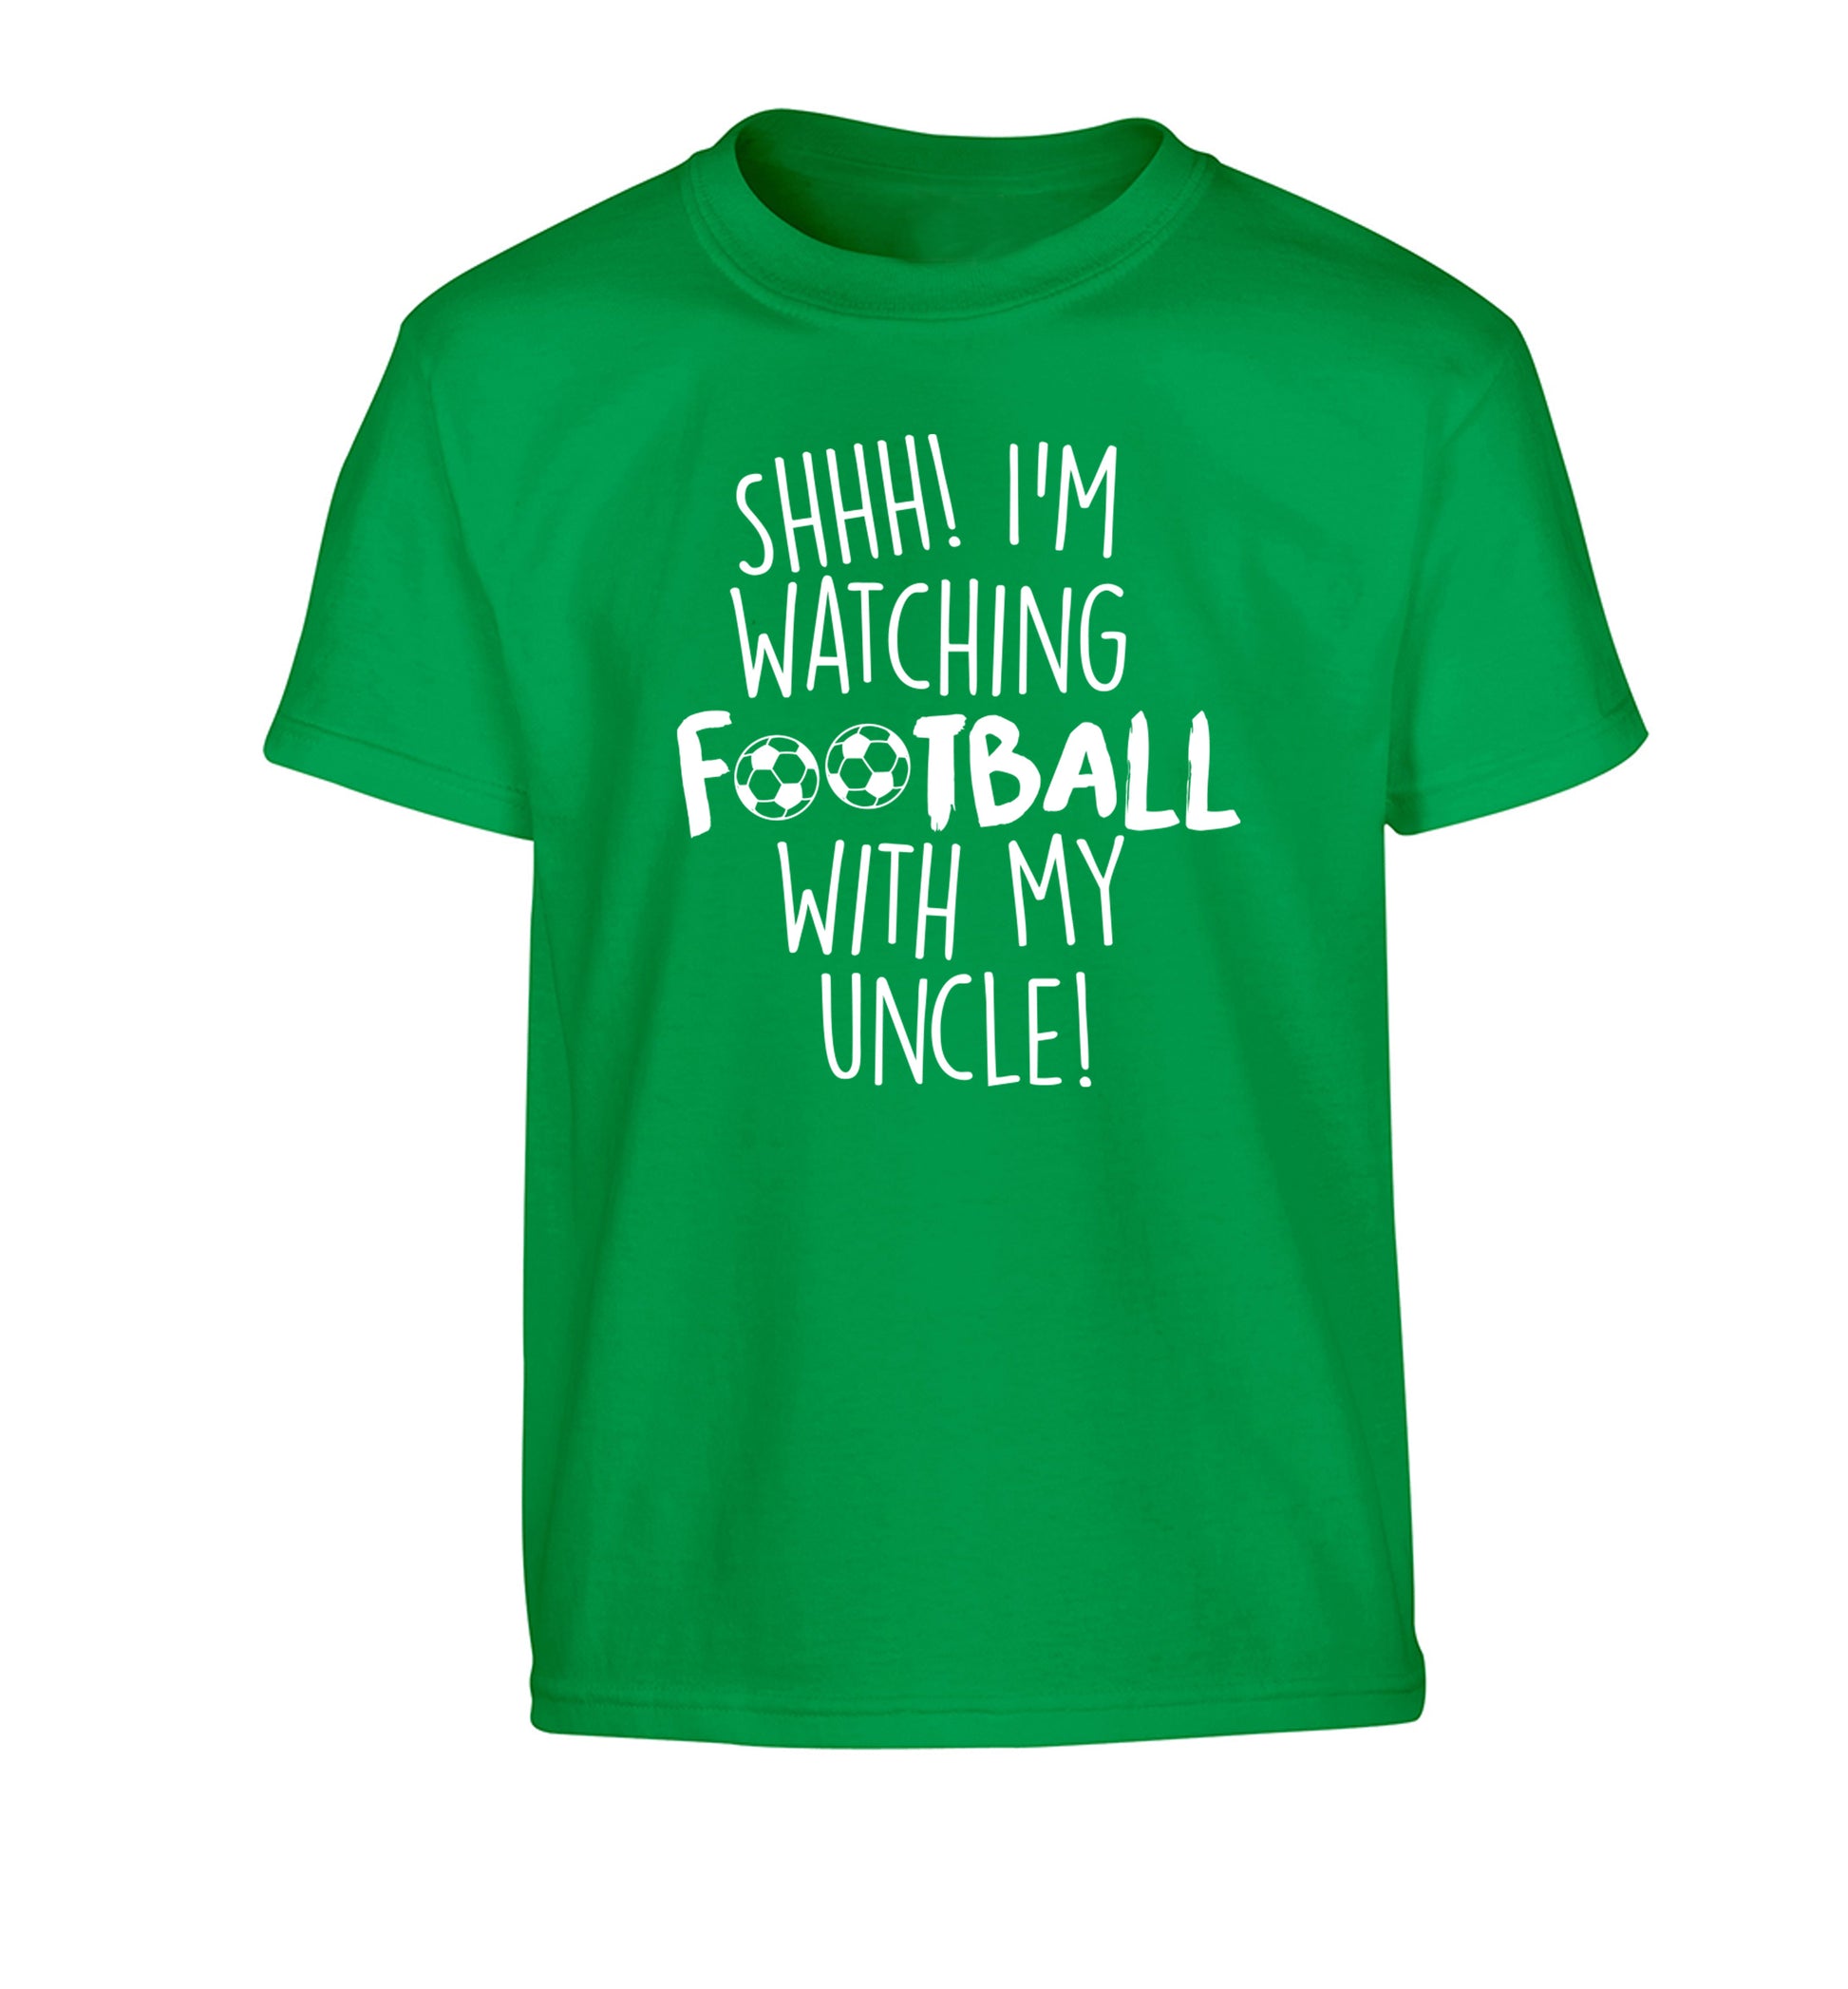 Shhh I'm watching football with my uncle Children's green Tshirt 12-14 Years